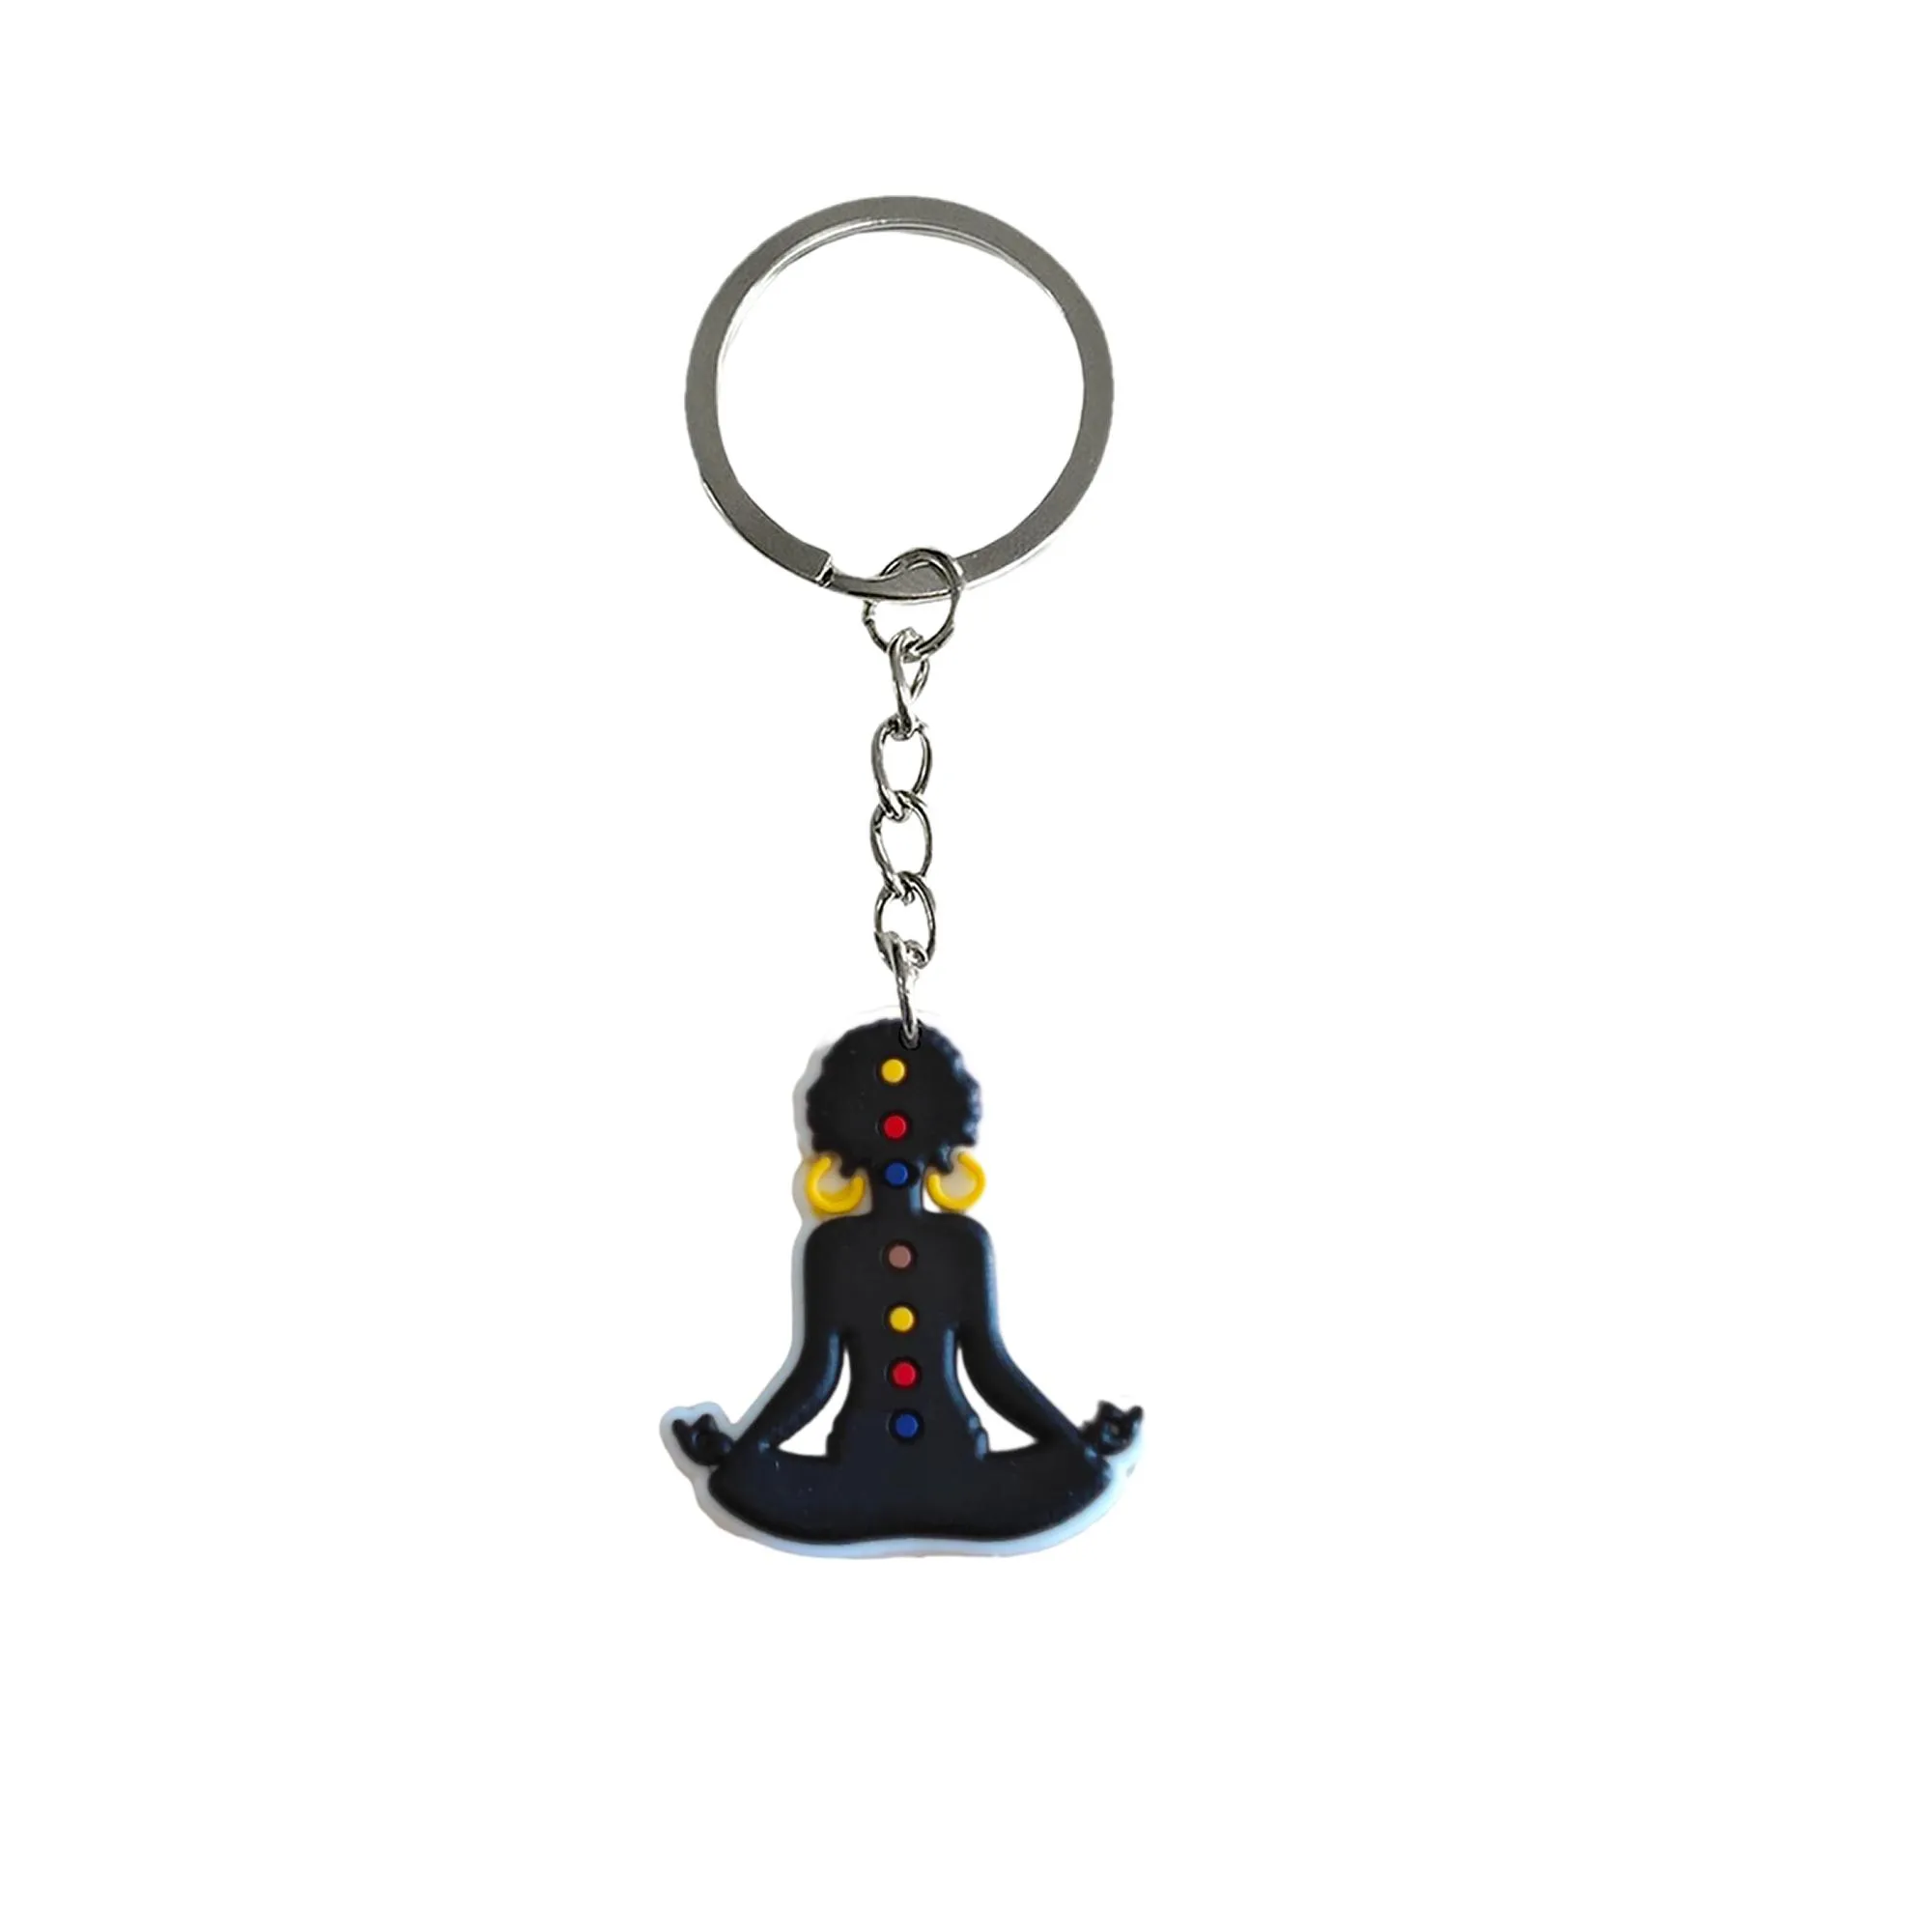 black multi style 45 keychain key chain for kid boy girl party favors gift ring christmas fans keyring school bags backpack suitable schoolbag keychains women girls